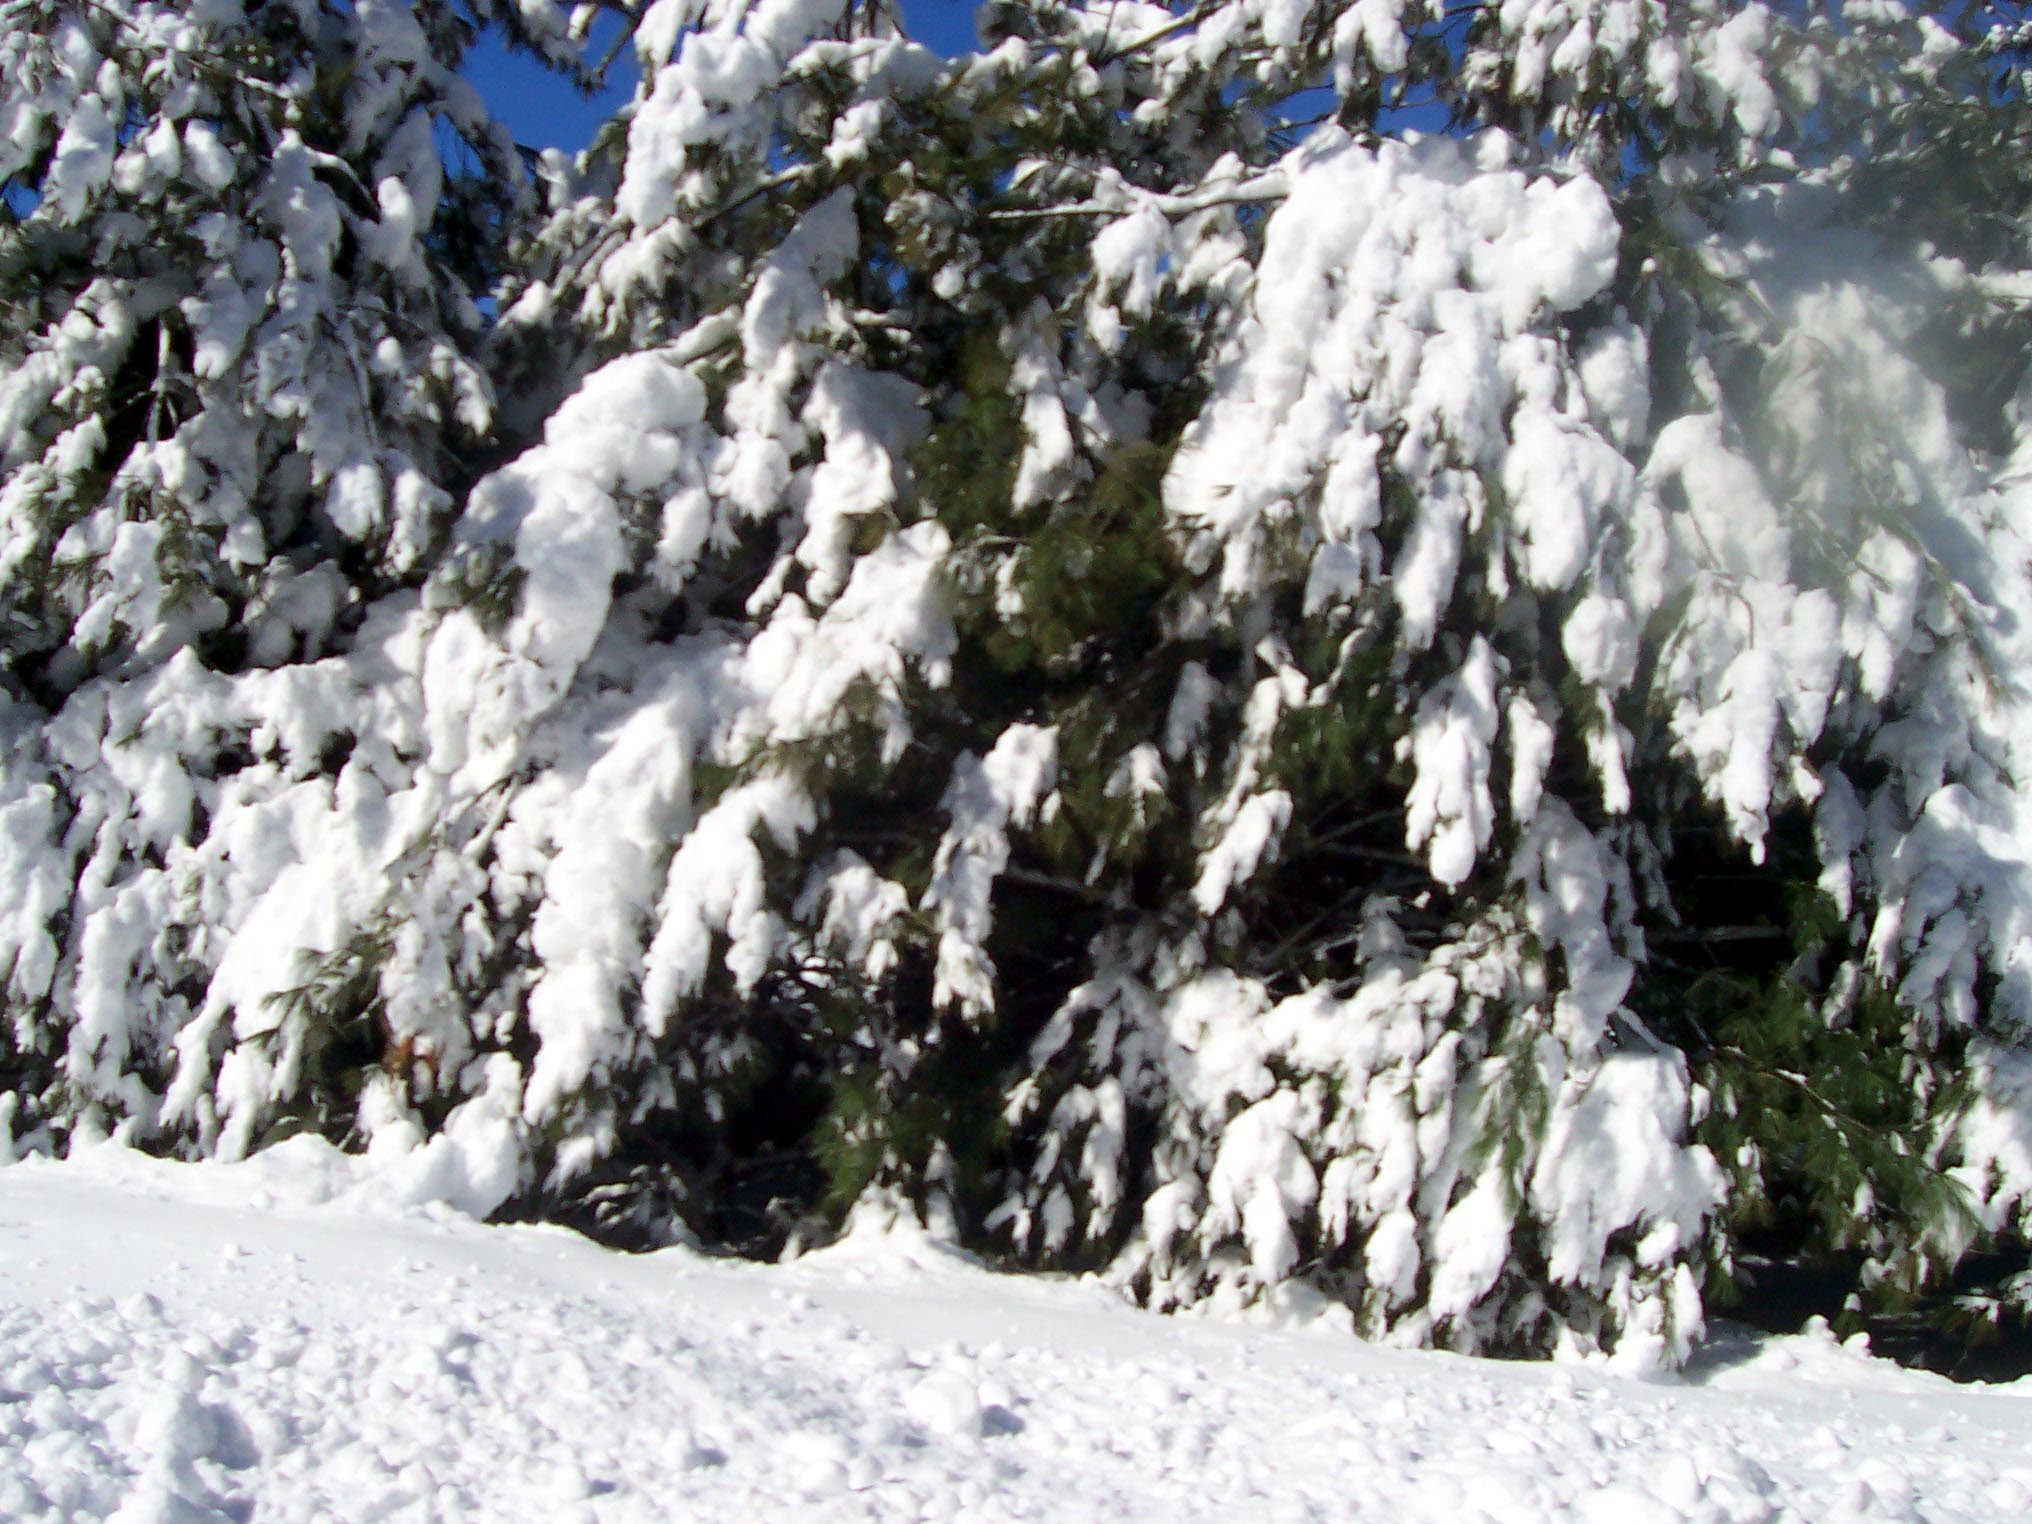 Heavy snow can easily weigh down branches, increasing their chances of breaking off.